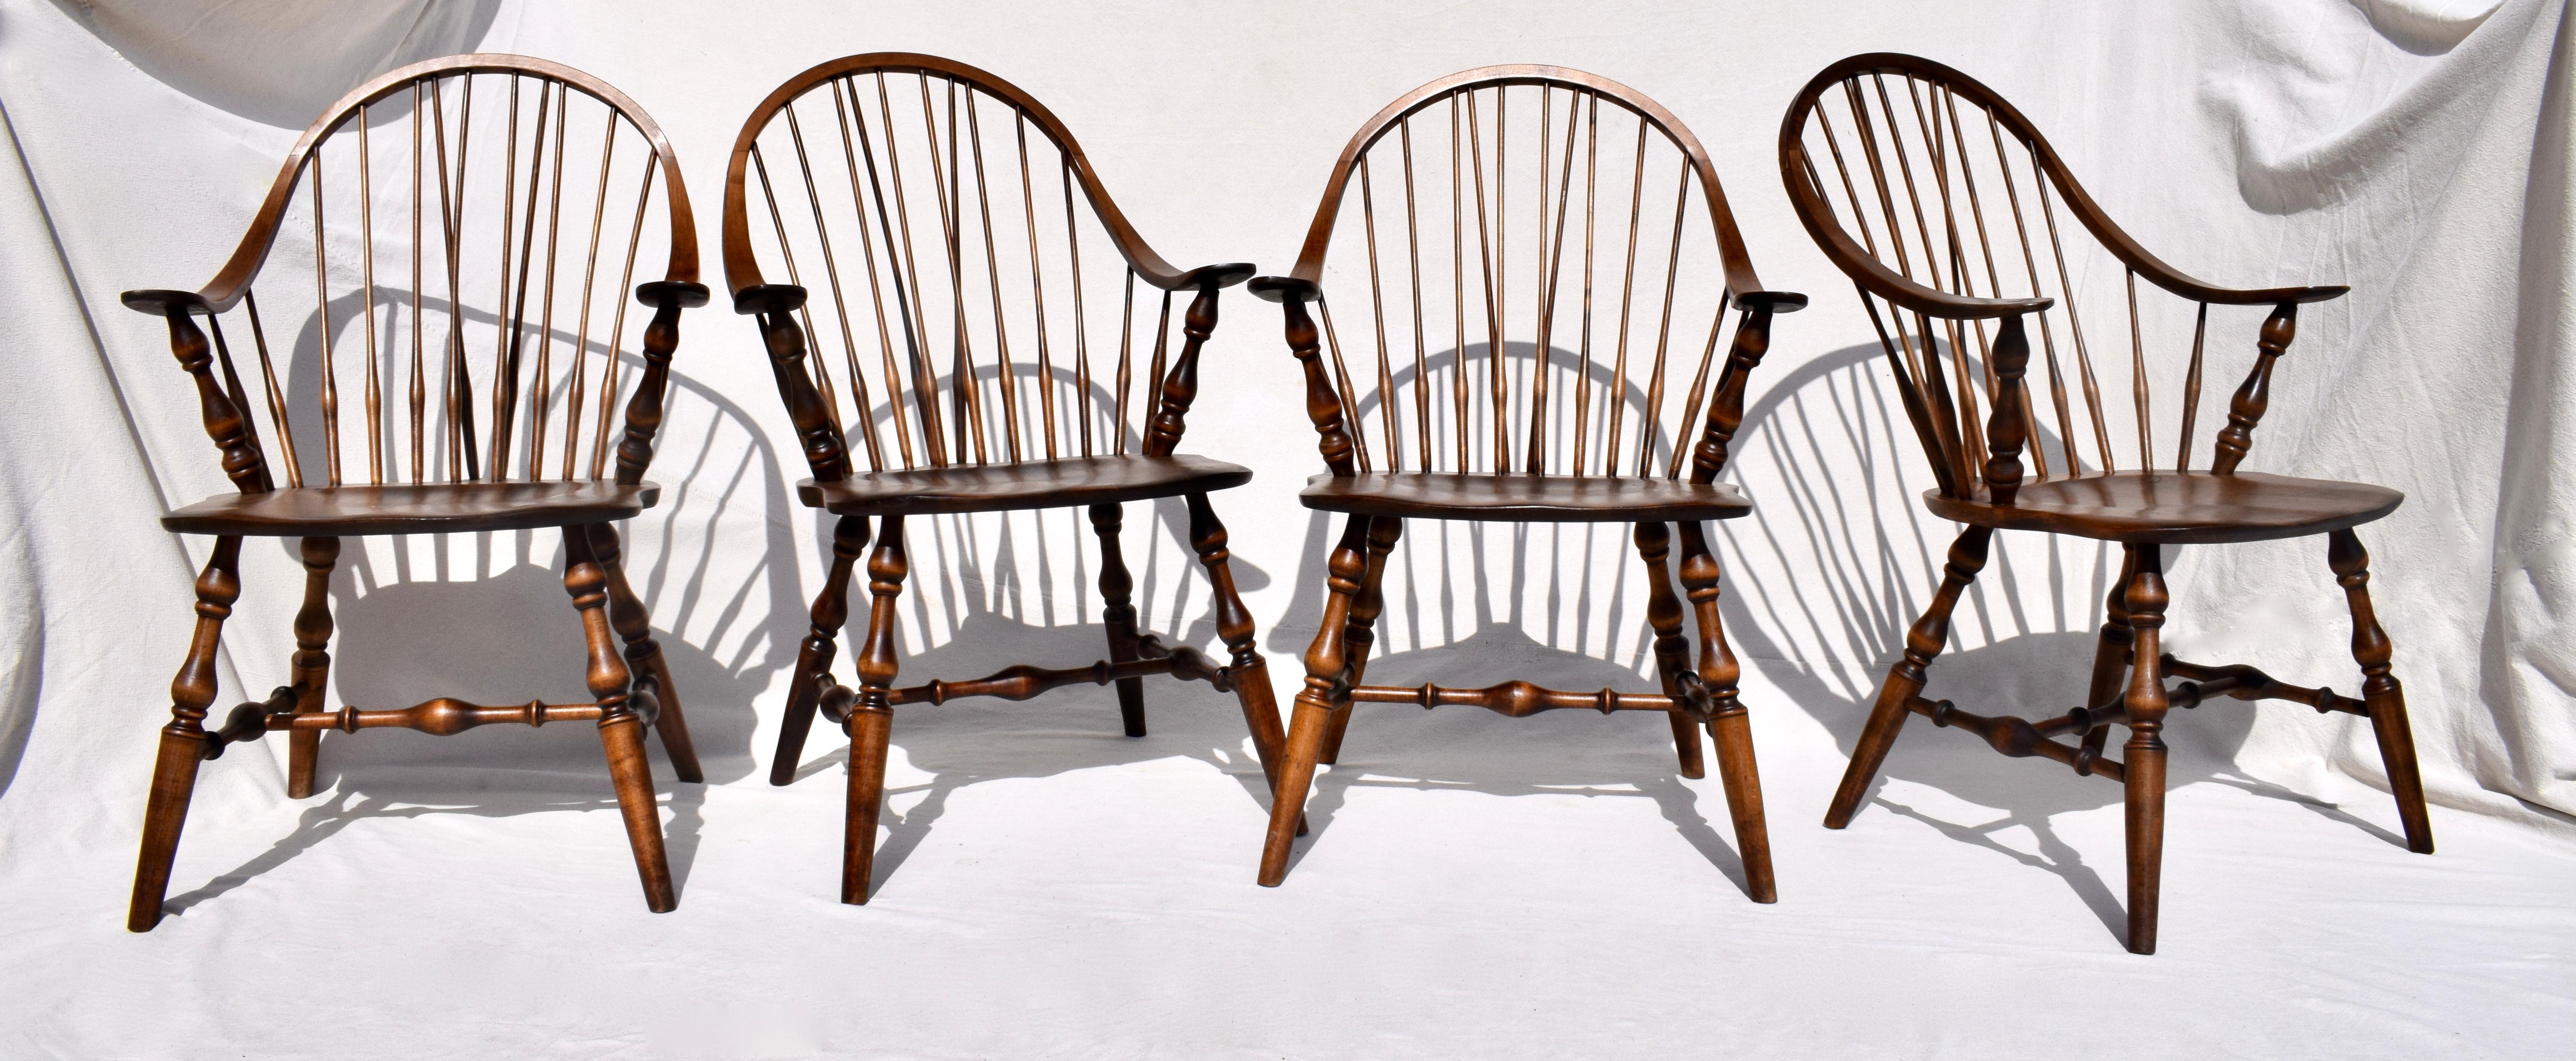 1950's Hale of Vermont Prospers continuous bow Windsor spindle back dining chairs of fine hand constructed dovetailing with Mortis & Tenon joinery. This scarcely seen set of four features interesting paddle like arms with turned legs & H stretcher